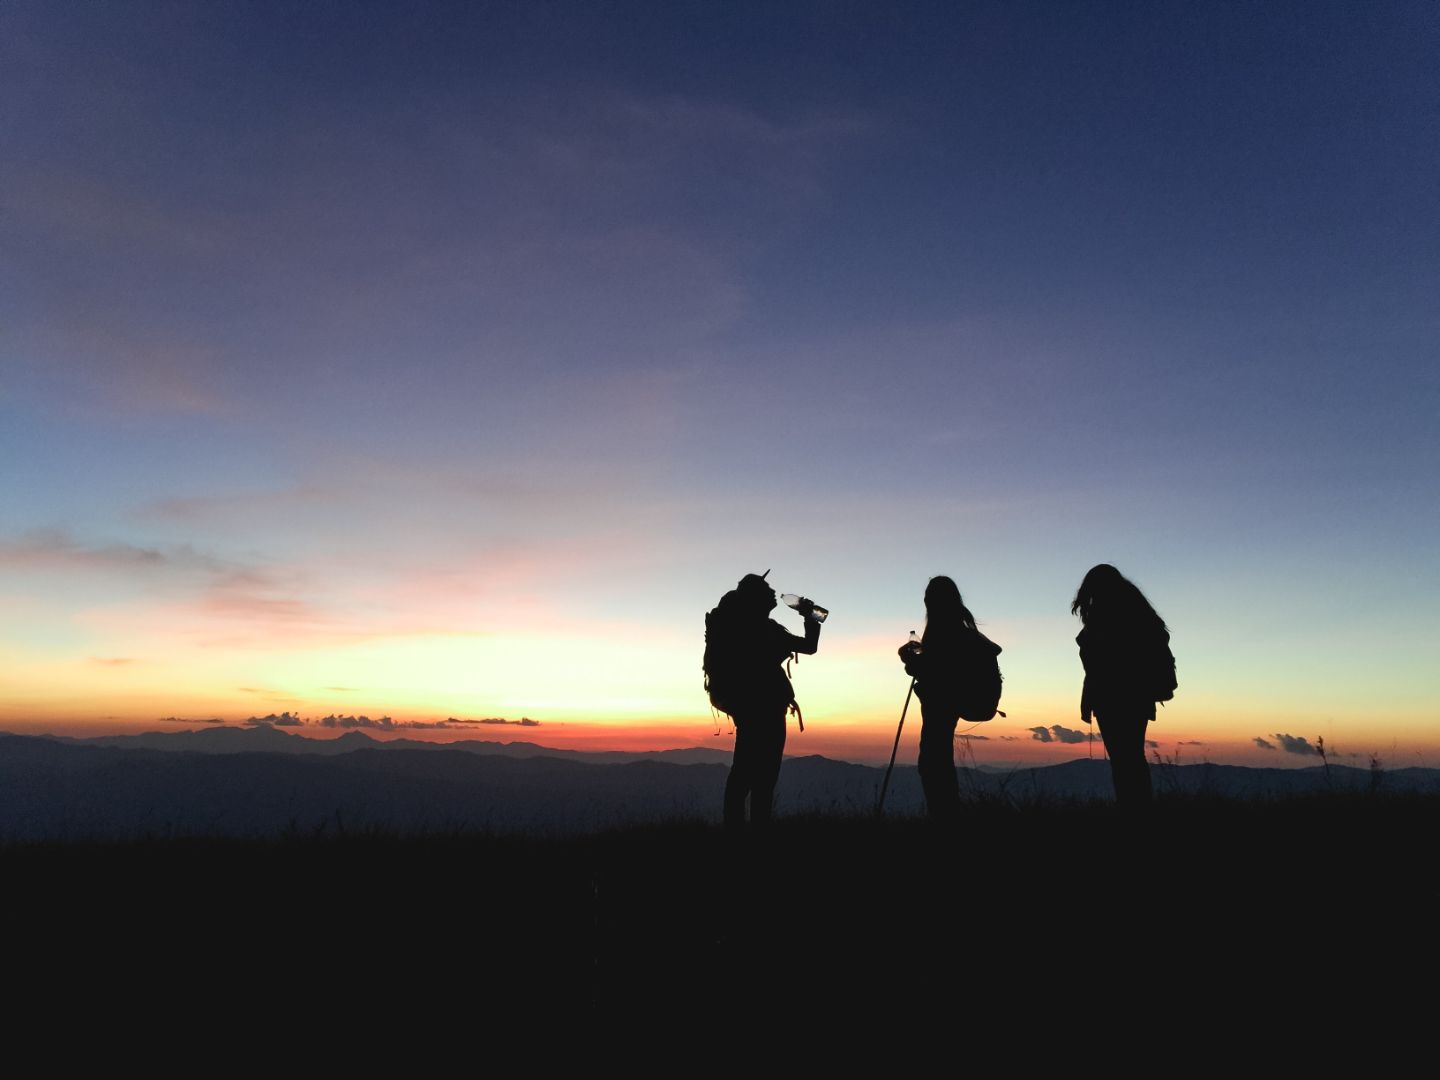 The Power of 1%, and how it can help you - No Ordinary Moments sunset with hikers